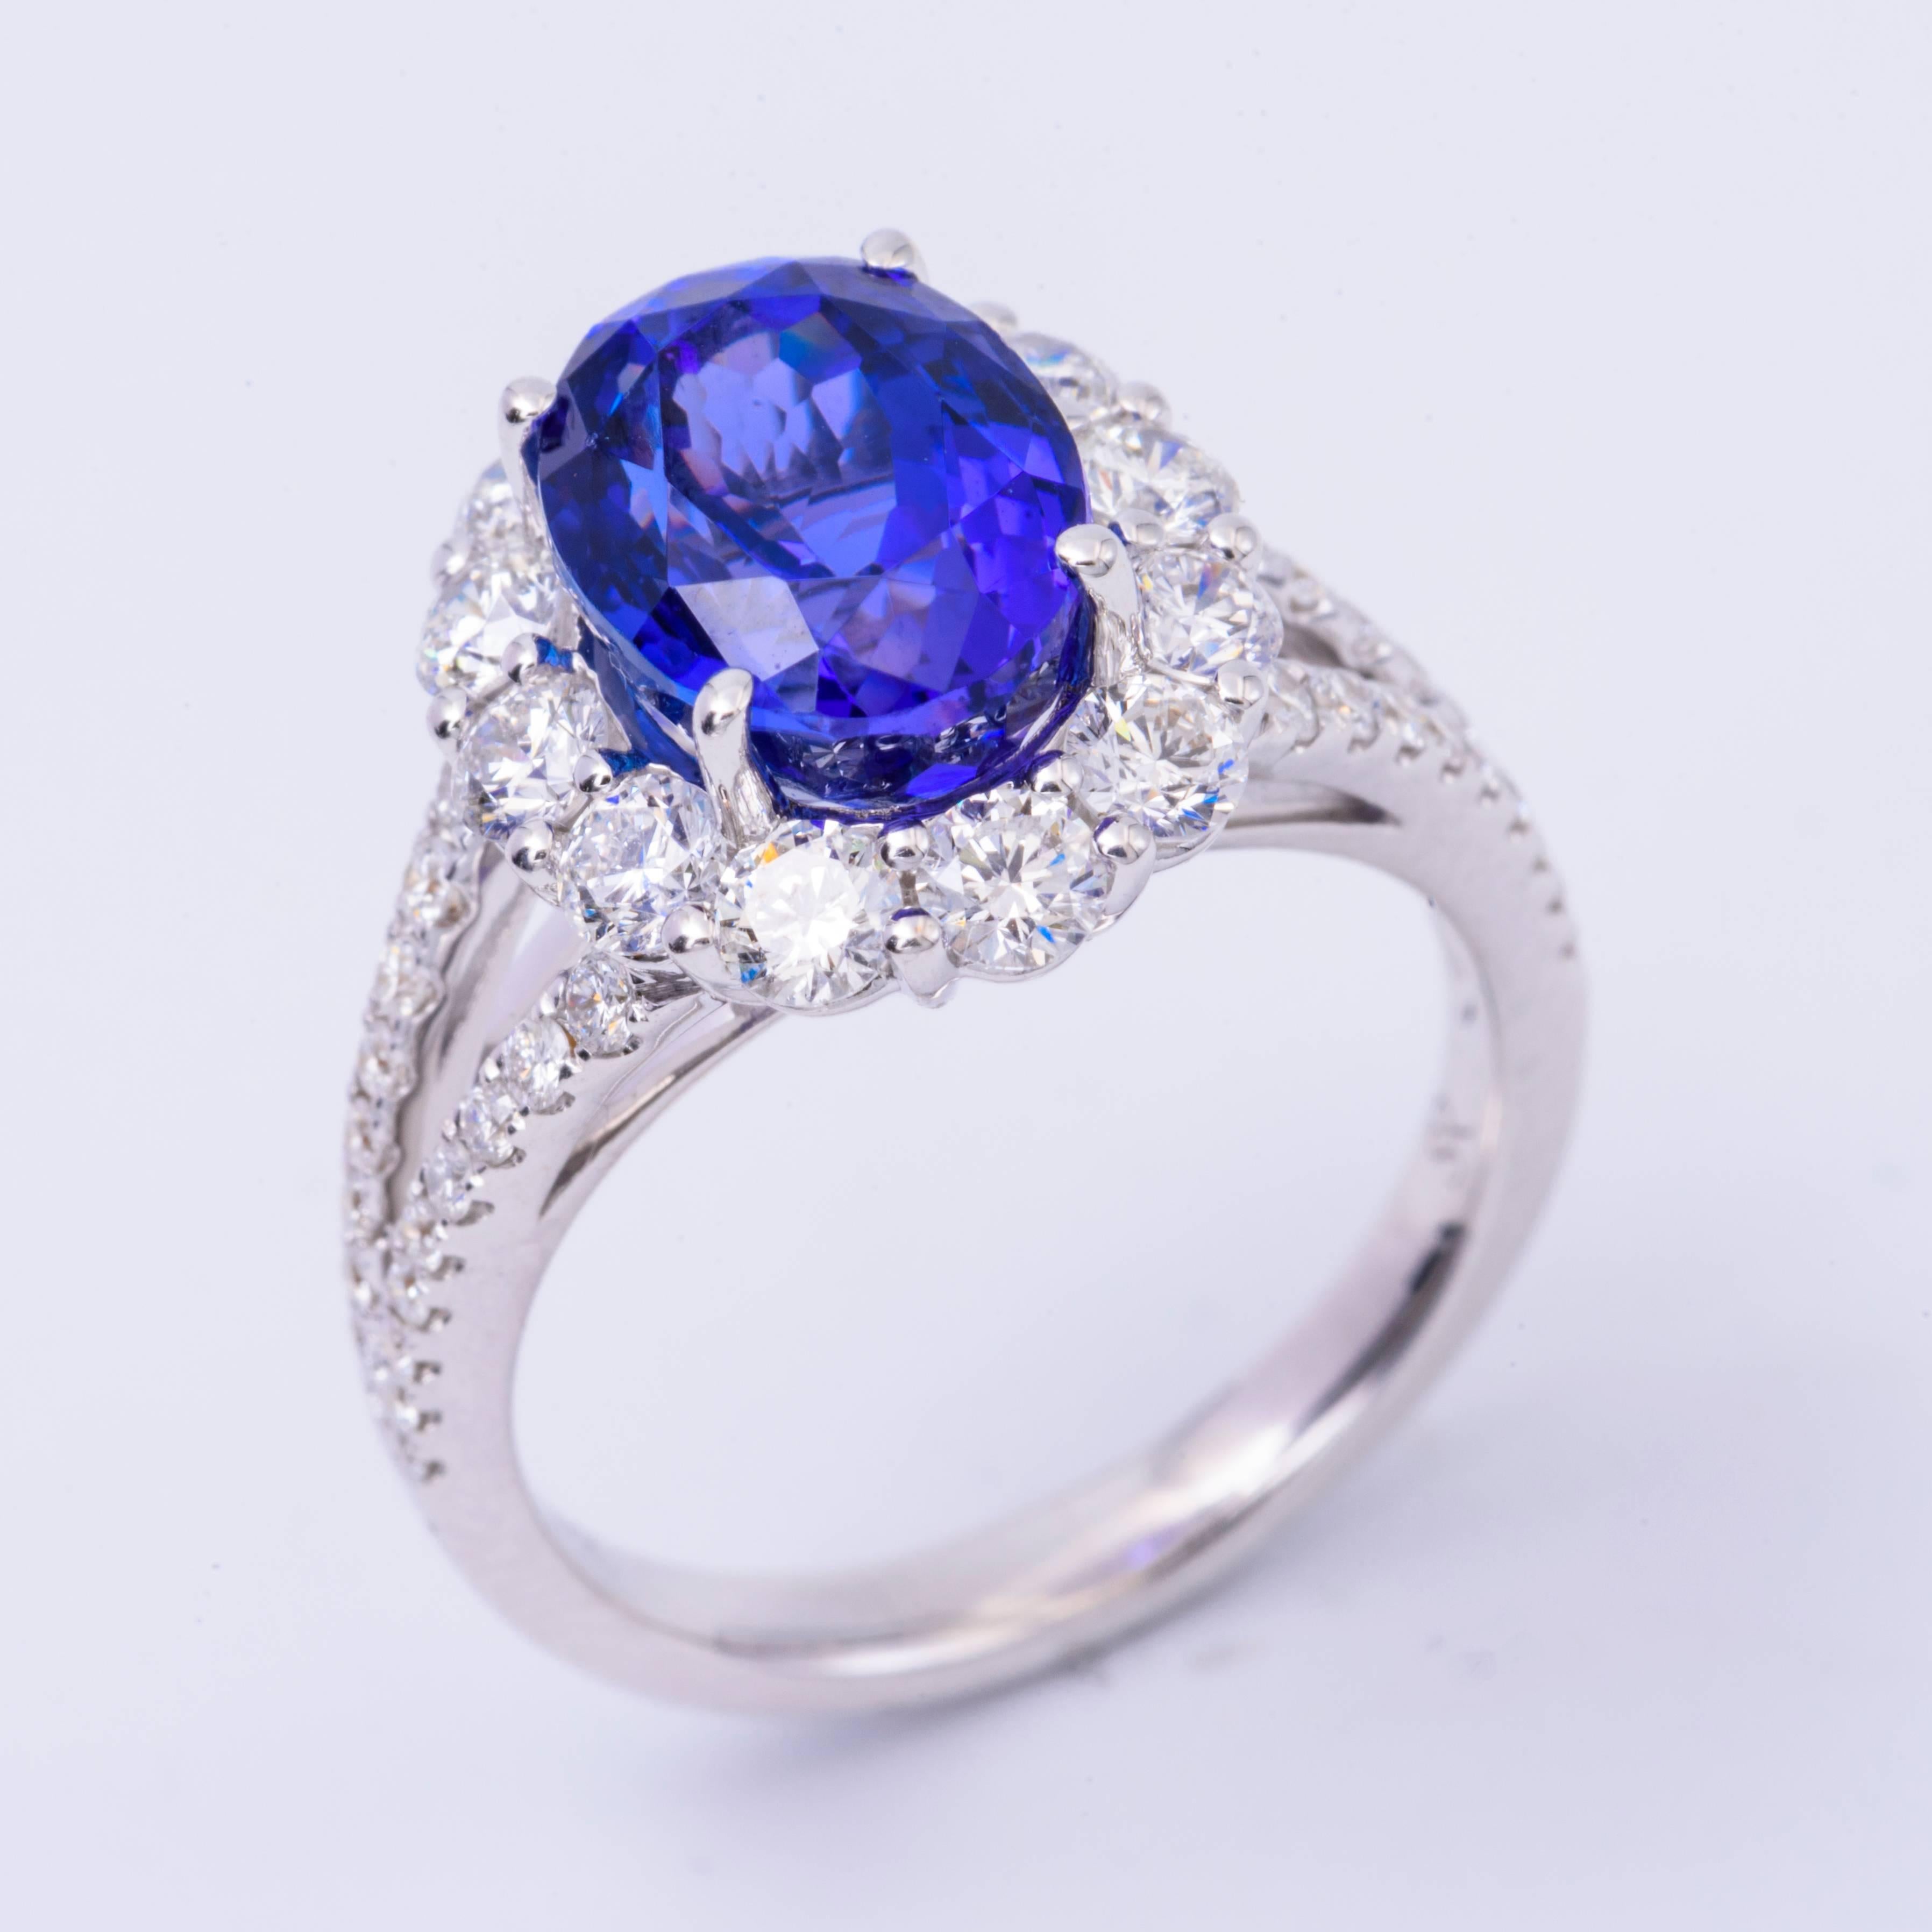 Beautiful crafted in 18K White gold this ring features a 10x 8 mm Tanzanite for a total weight of approximately 4.85 Carats 
The diamonds surrounding this beautiful stone has an approximate total weight of 1.53 Carats.
All our gemstones are genuine,